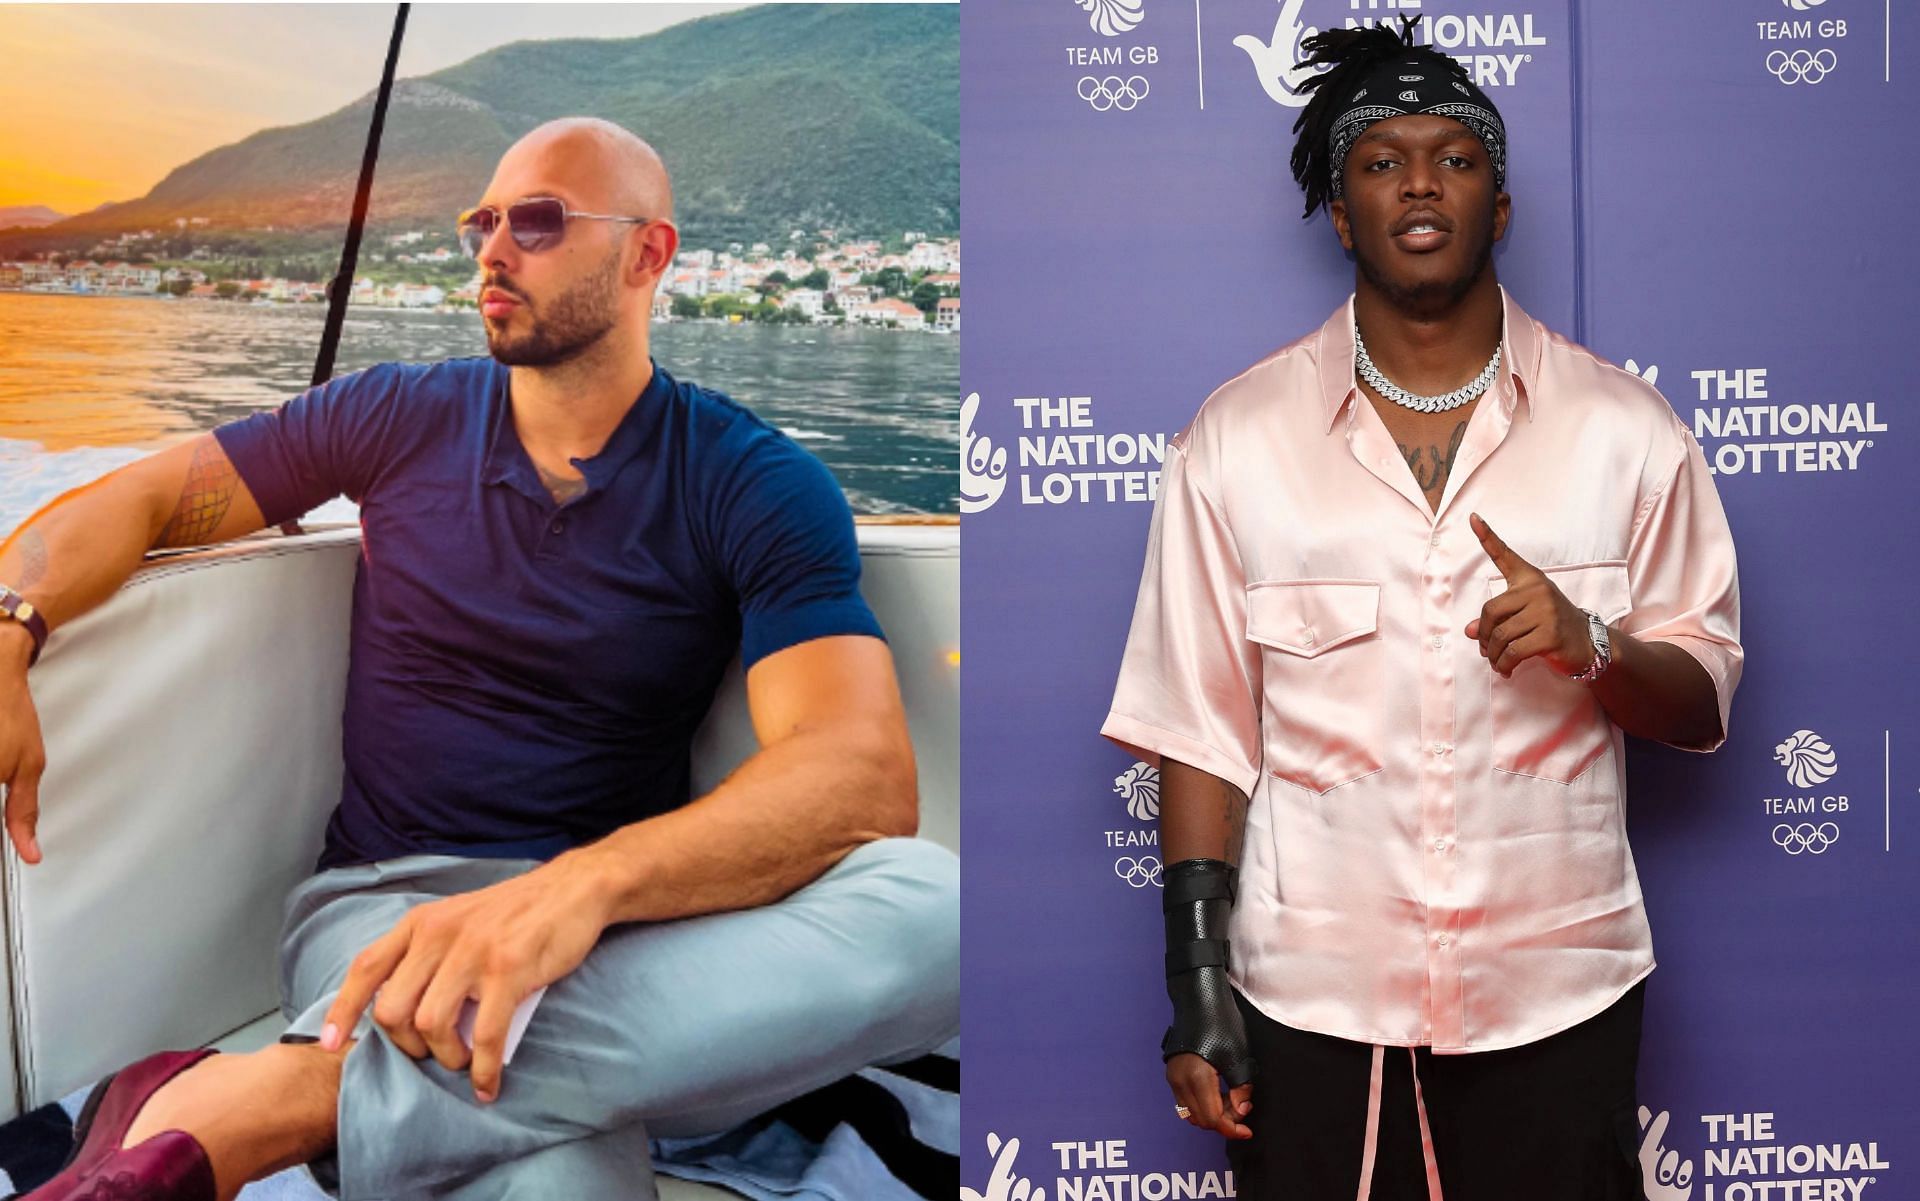 Internet stars Andrew Tate (L), and KSI (R). [Images via Getty, and @CobraTate on Instagram]